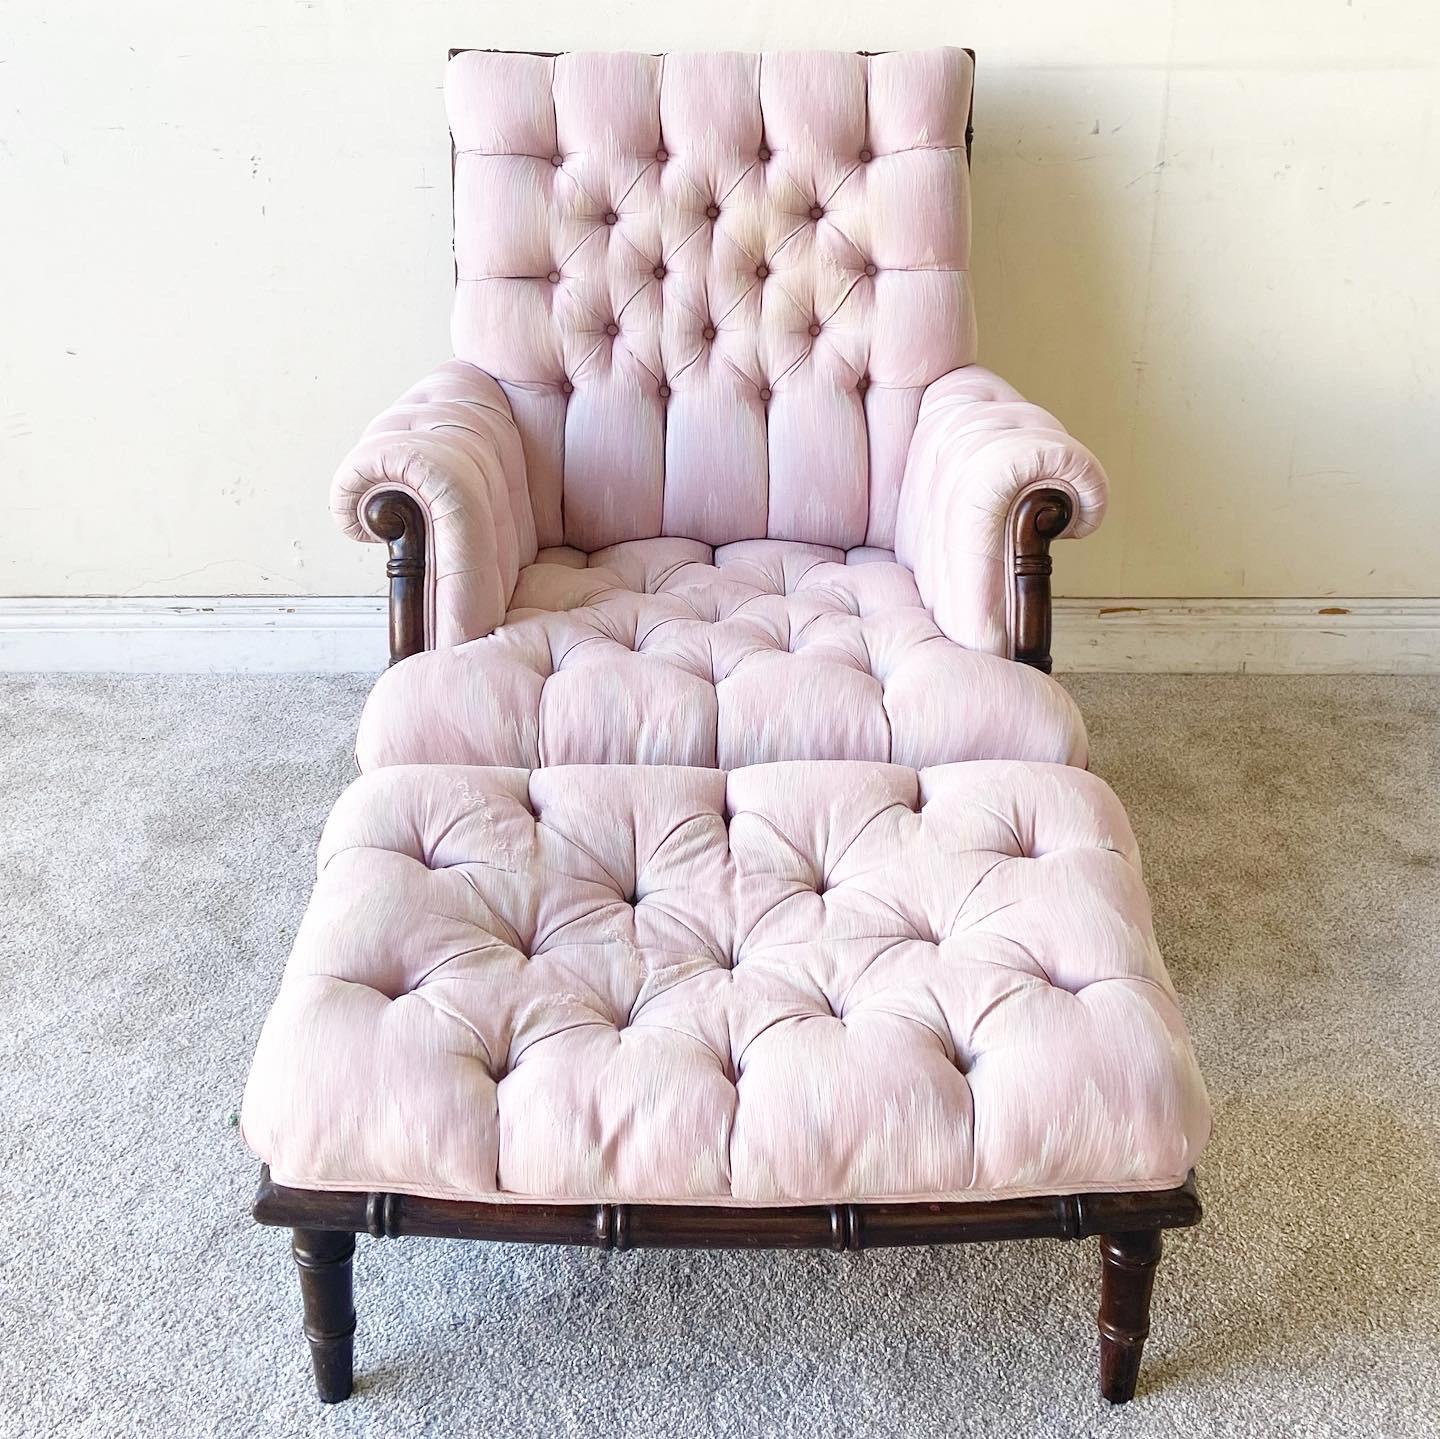 Late 20th Century Regency Tufted Pink Fabric Faux Bamboo Lounge Chair with Ottoman